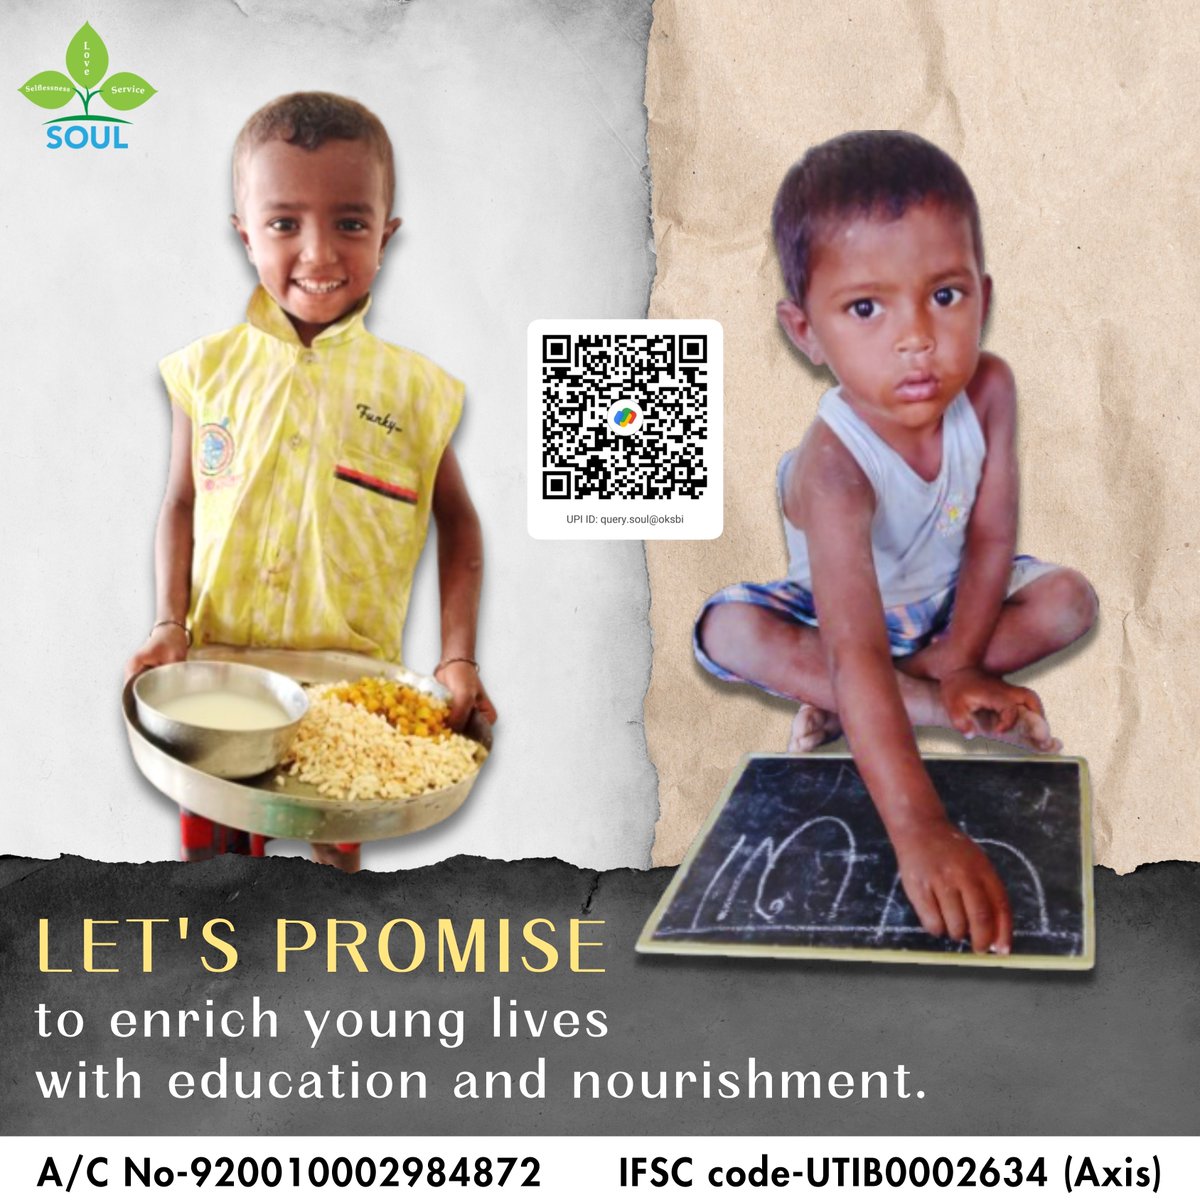 Let's promise to enrich young lives with education and nourishment as we close the year. 📷📷📷
#EducateAndNourish #EmpowerWithEducation #NourishTheFuture #Soulngosundarban